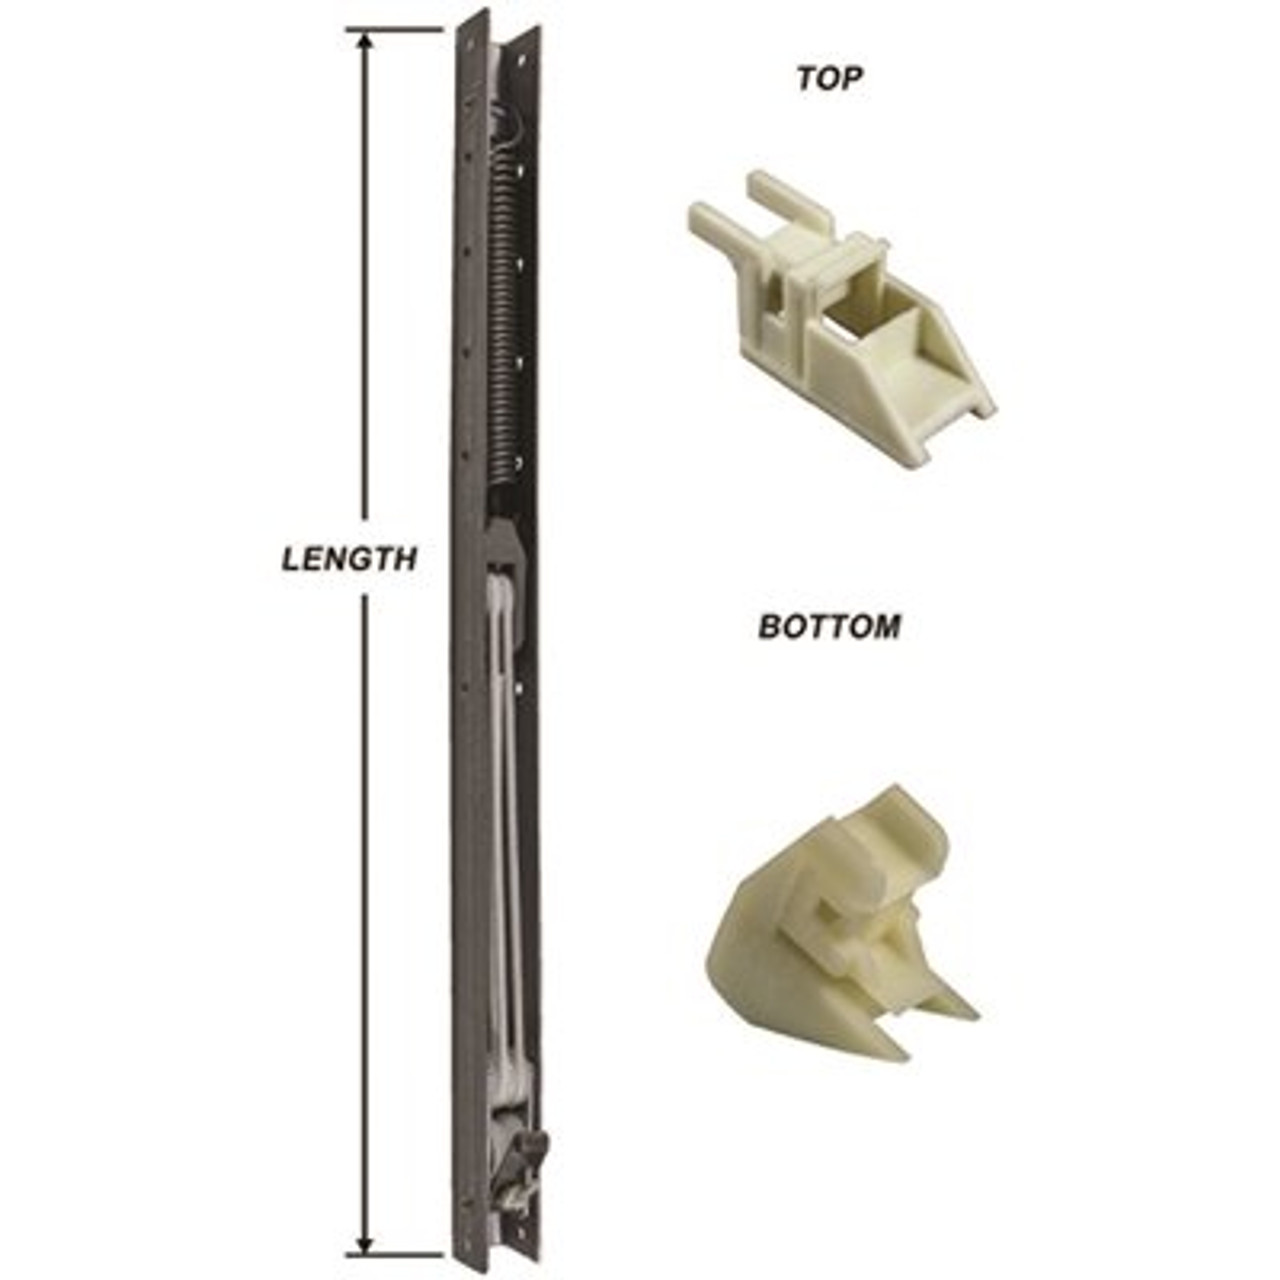 25 in. L Window Channel Balance 2440 with Top and Bottom End Brackets Attached 9/16 in. W x 5/8 in. D ( Pack of 10 )